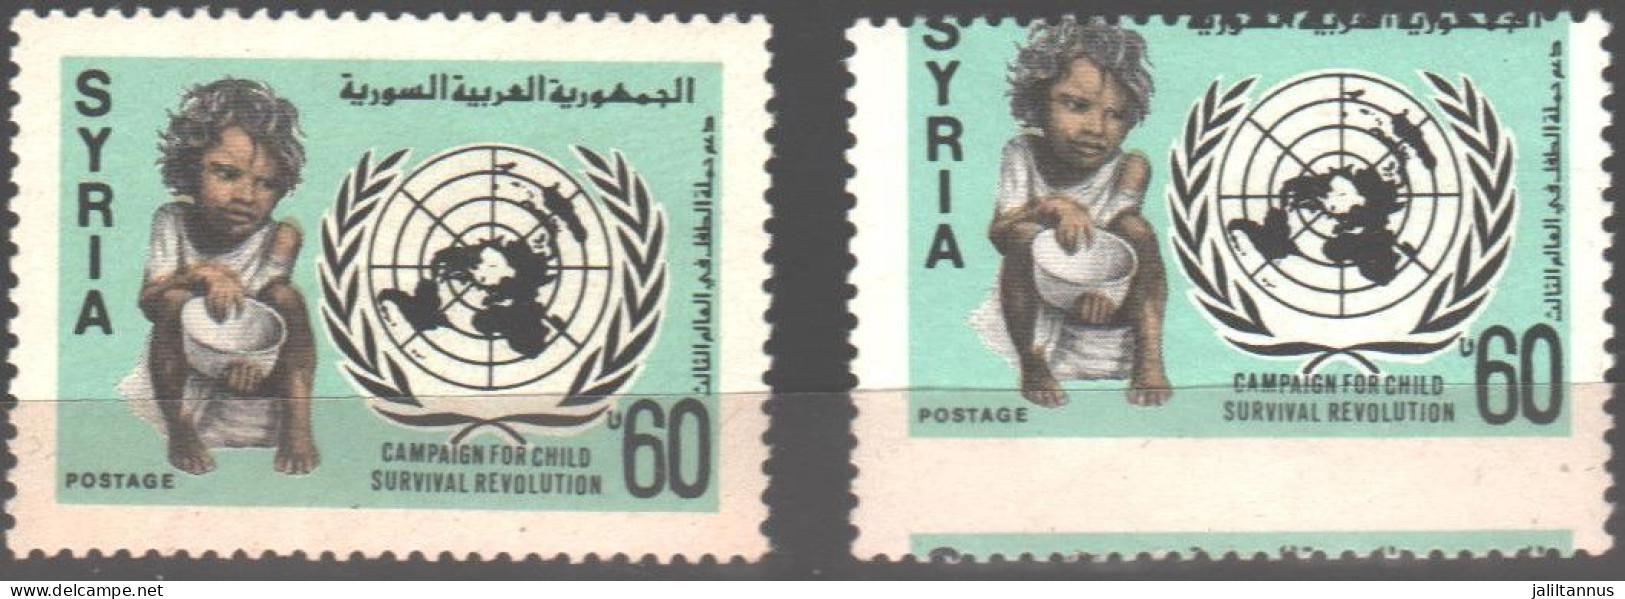 Syria - Perforation Error Set Emblem And Child With Empty Bowl 1985 Stamp For Comparison MNH - Syrien